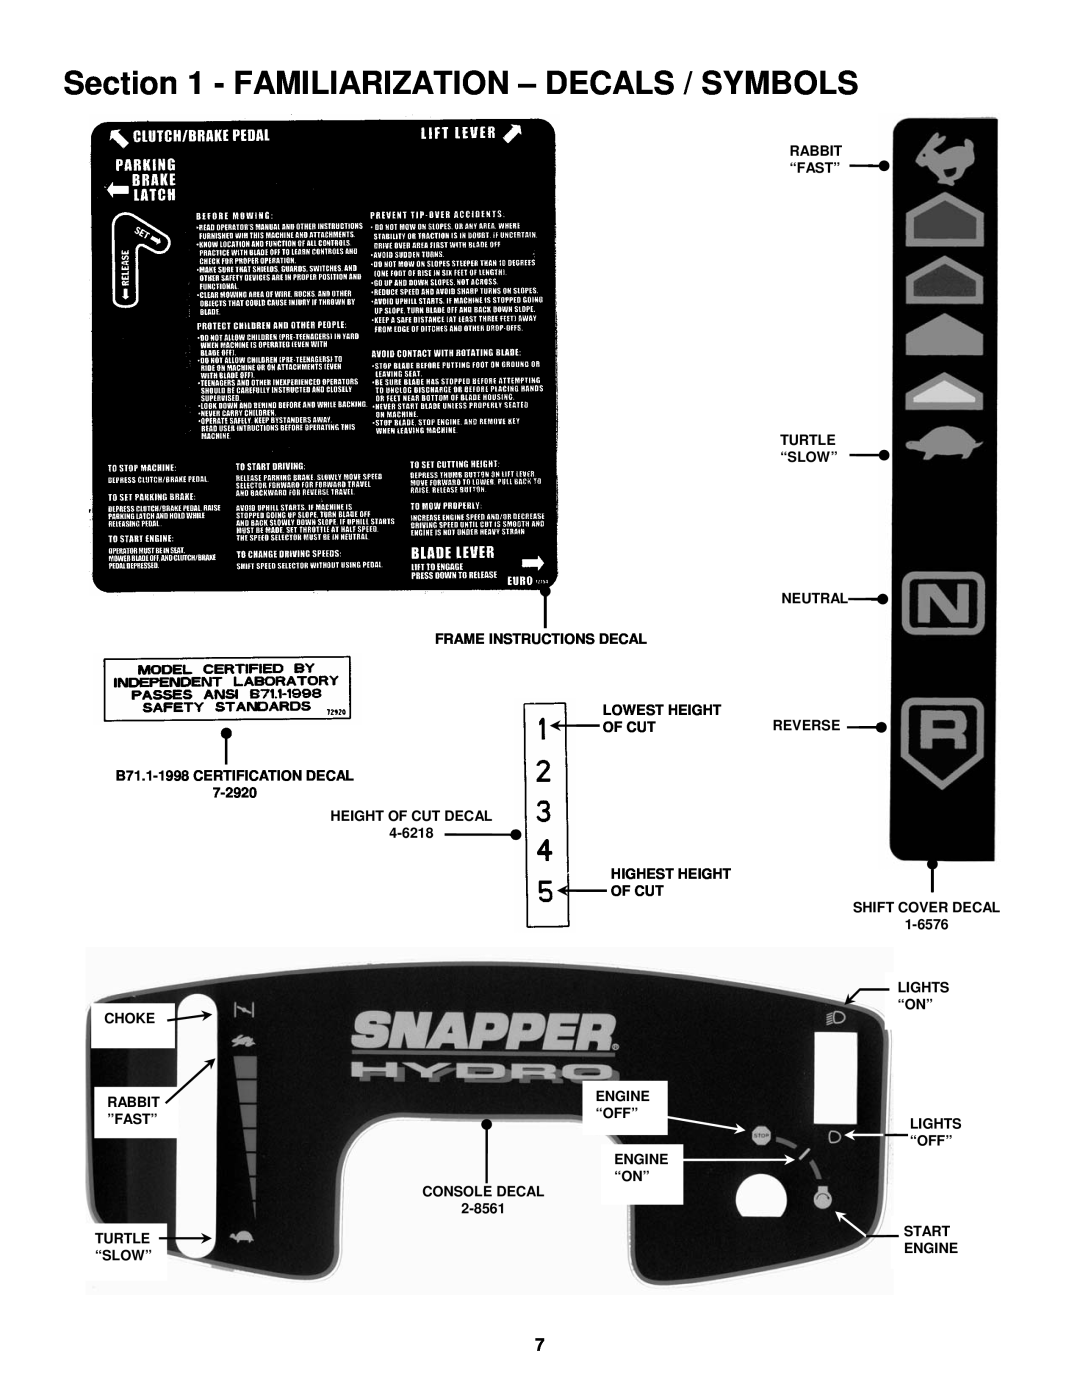 Snapper ELT145H33FBV Familiarization - Decals / Symbols, Frame Instructions Decal Lowest Height Of Cut, Choke, Engine 